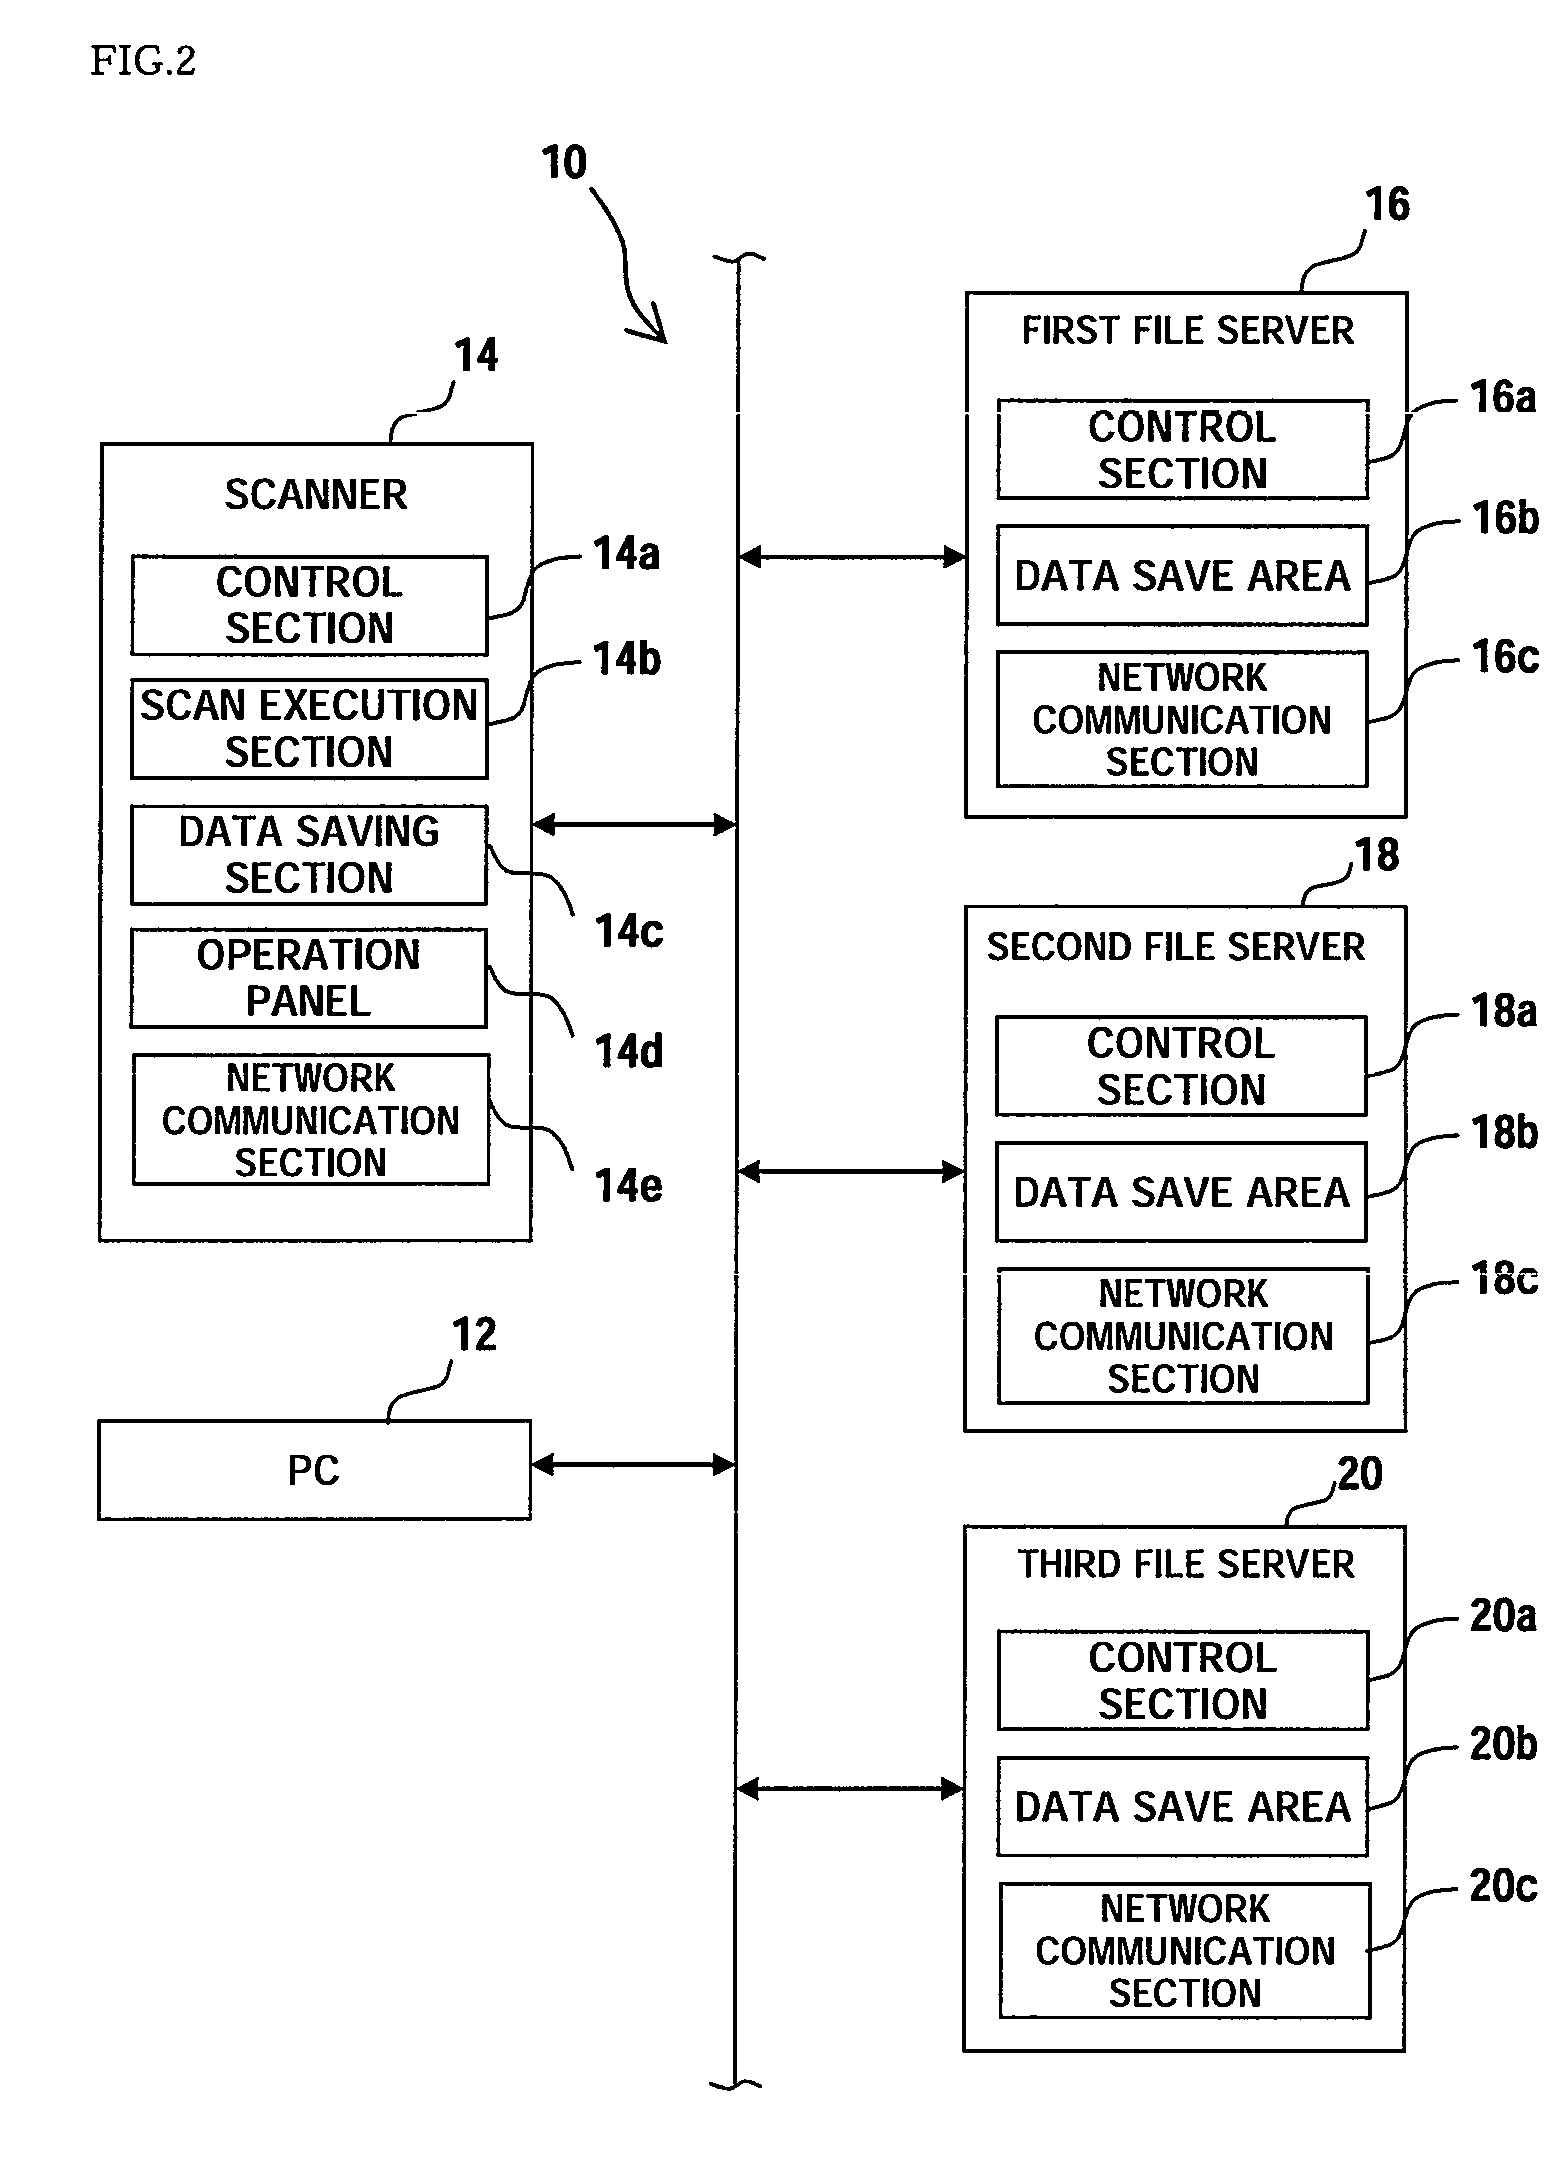 Network file processing system for sending multicast acceptance requests for transmission of image data via a network